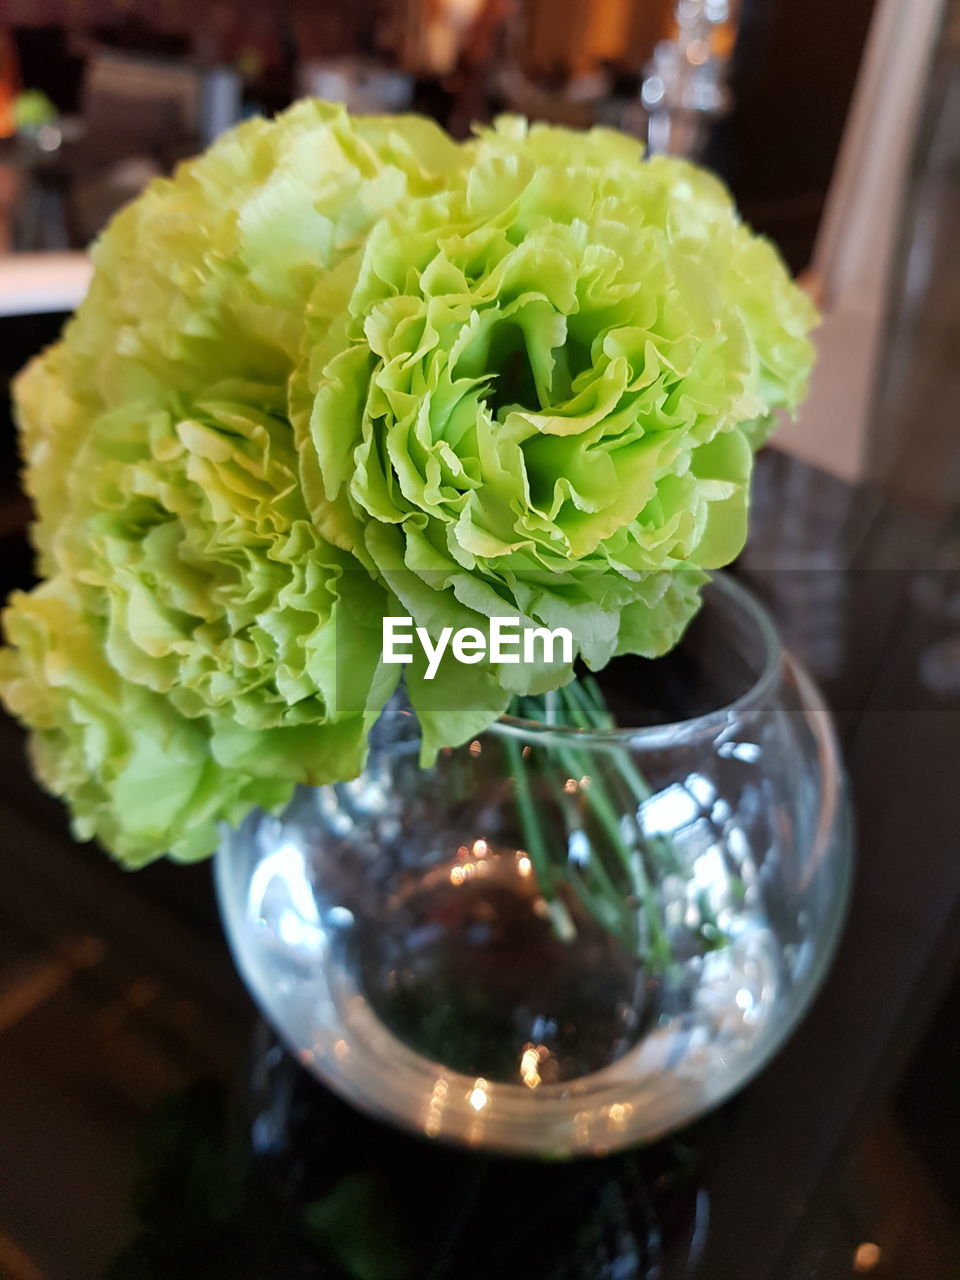 CLOSE-UP OF FLOWER IN VASE ON TABLE